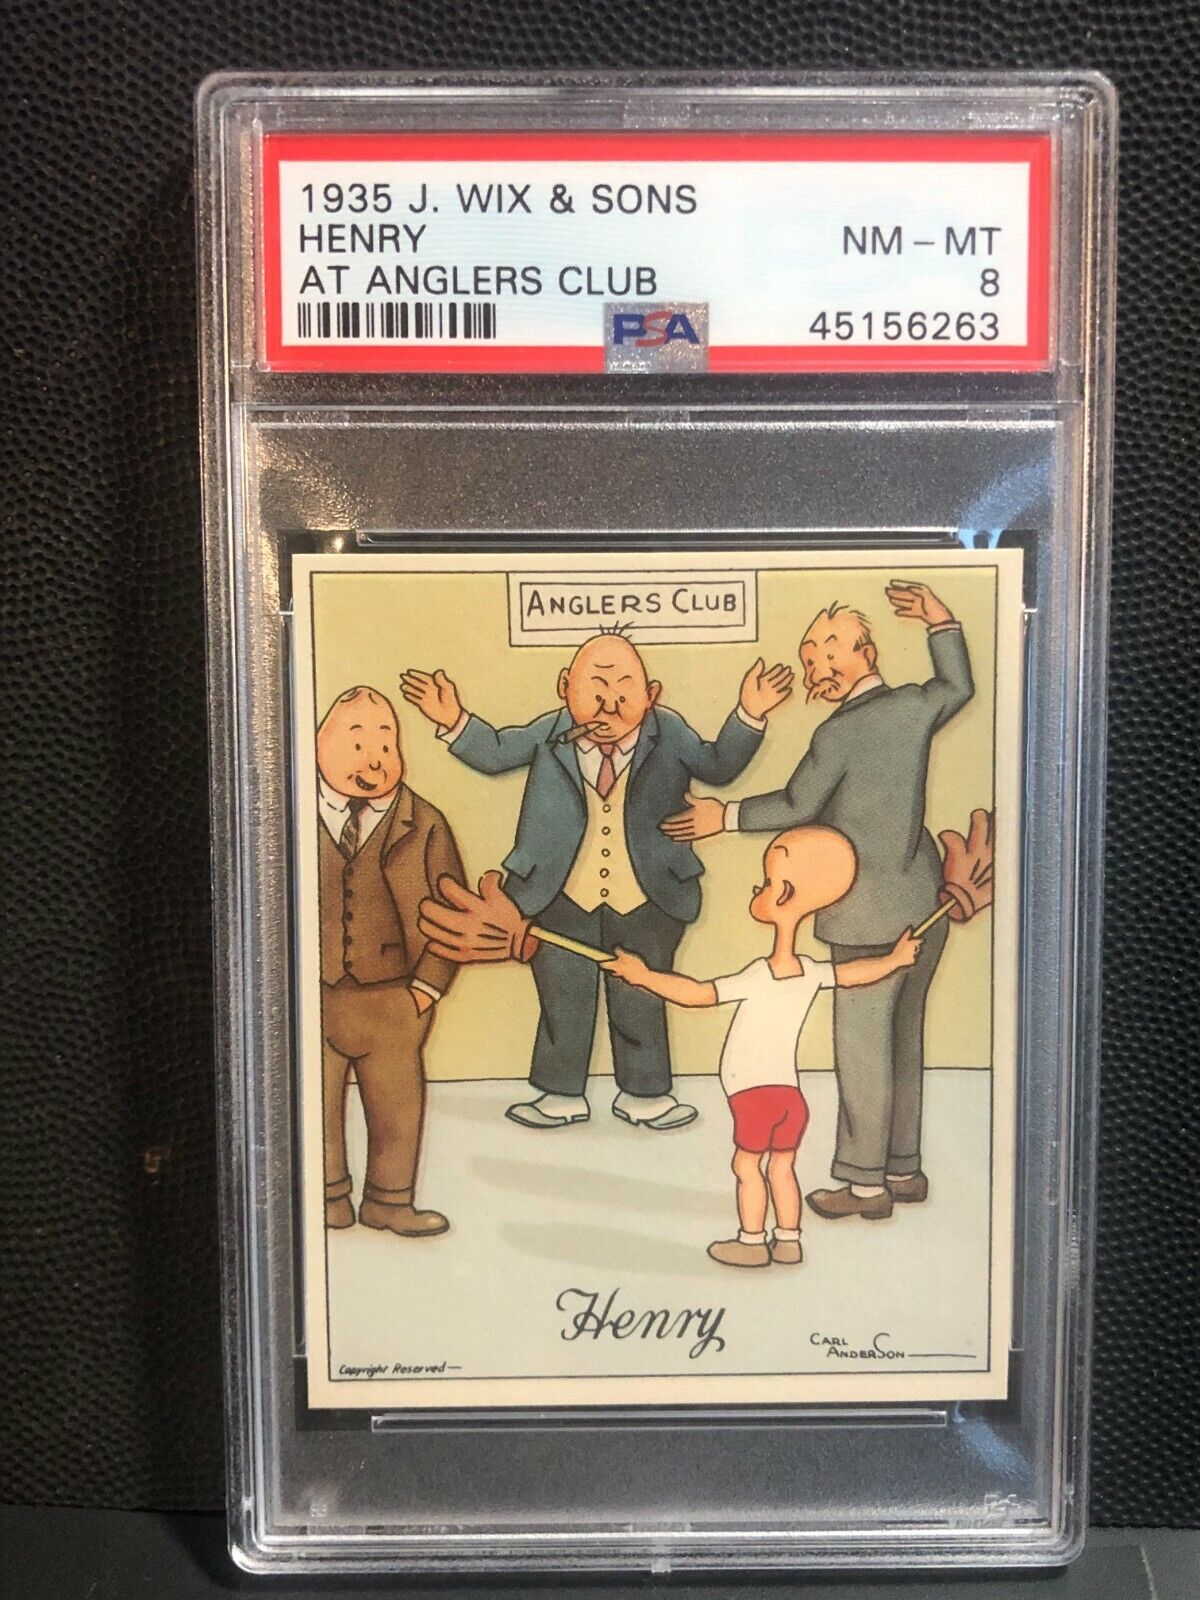 Henry at Anglers Club 1935 J. Wix & Sons Tobacco Card Graded PSA 8 NM-MT